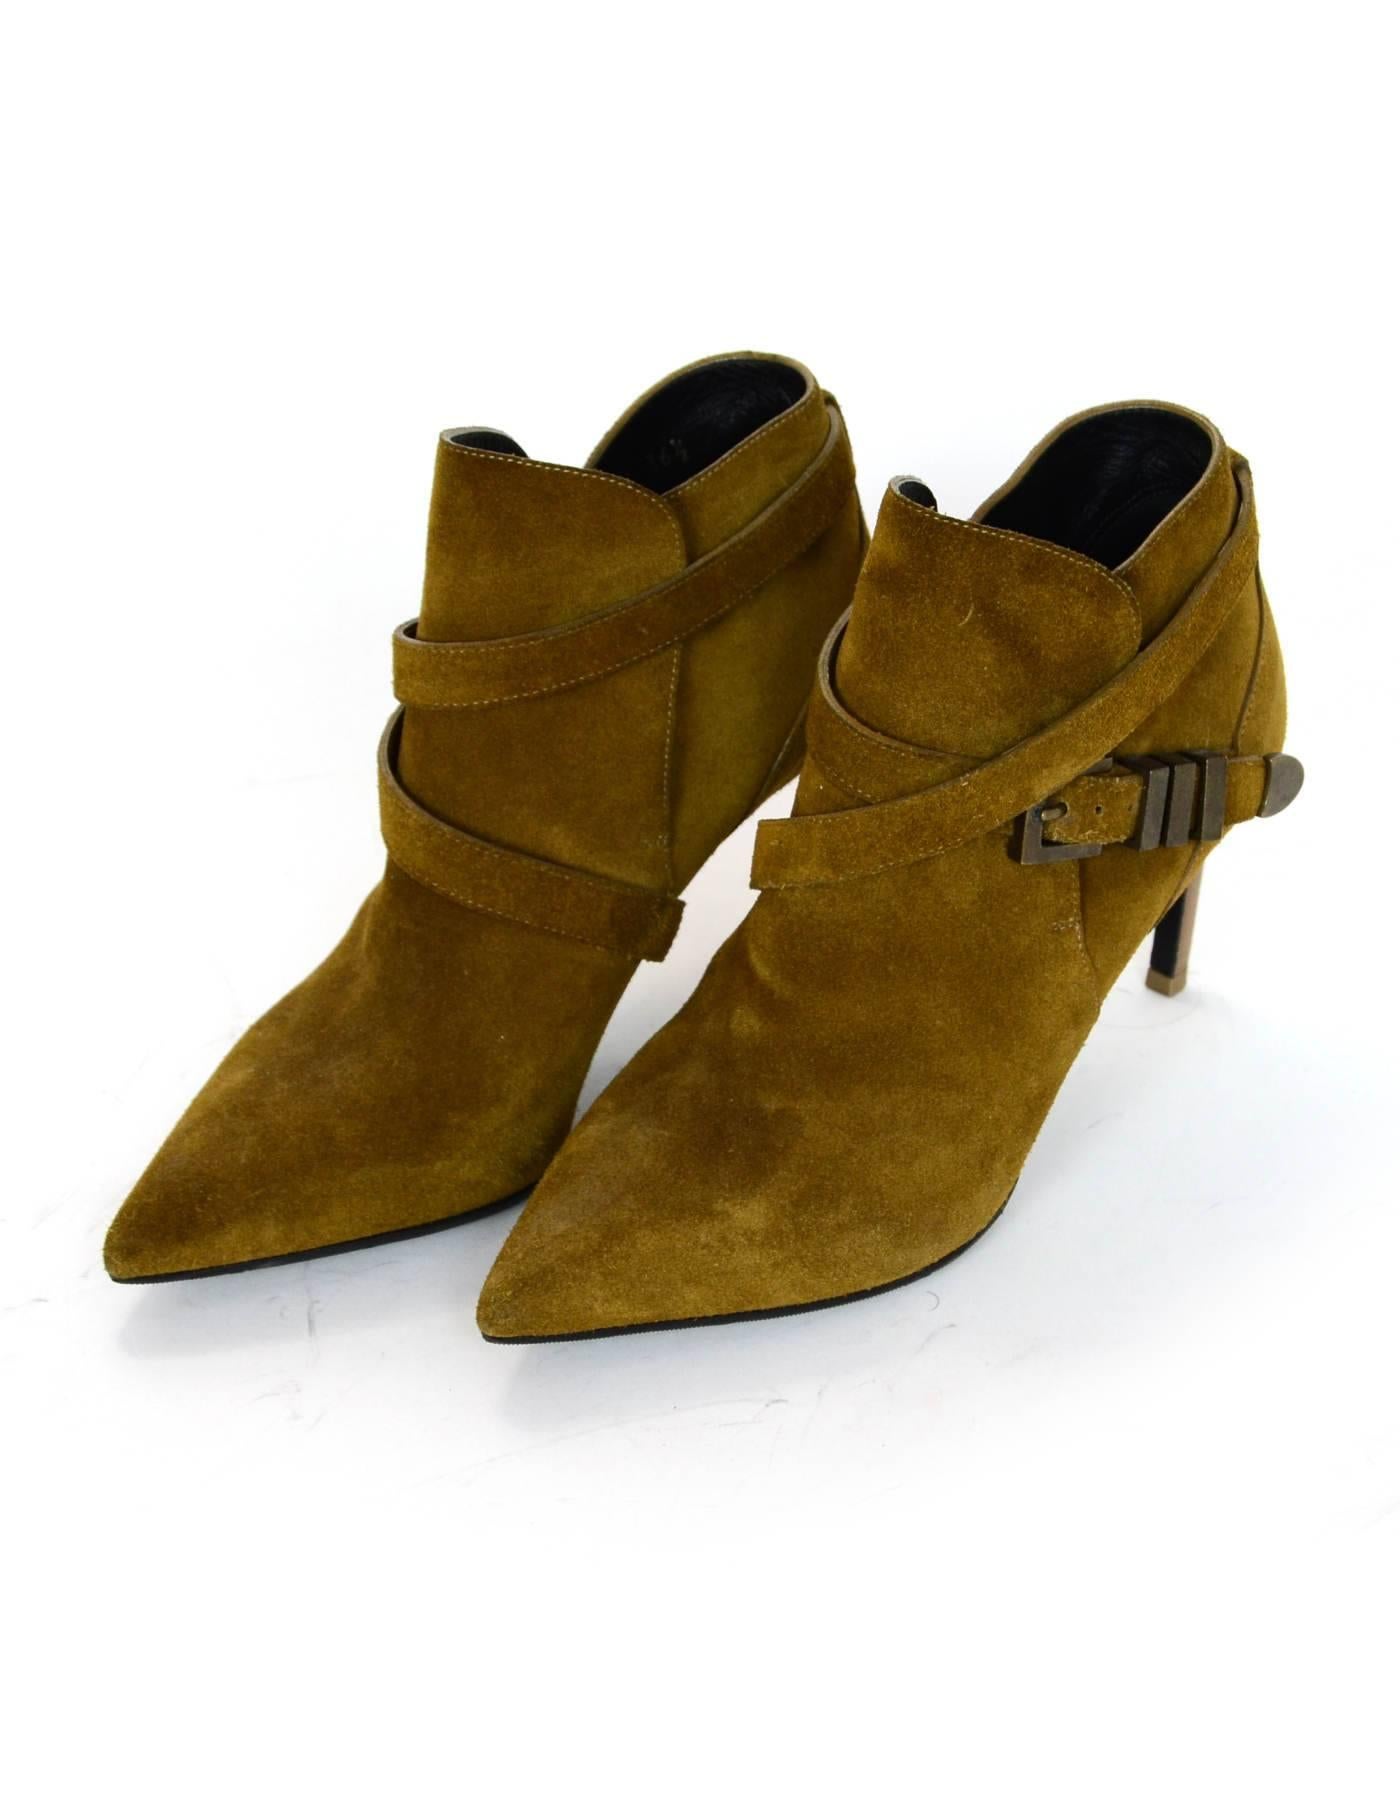 Saint Laurent Tan Suede Booties Sz 36.5

Made In: Italy
Color: Tan
Materials: Suede
Closure/Opening: Slide on with side buckle closure
Sole Stamp: Saint Laurent Made in Italy 36.5
Overall Condition: Excellent pre-owned condition with the exception